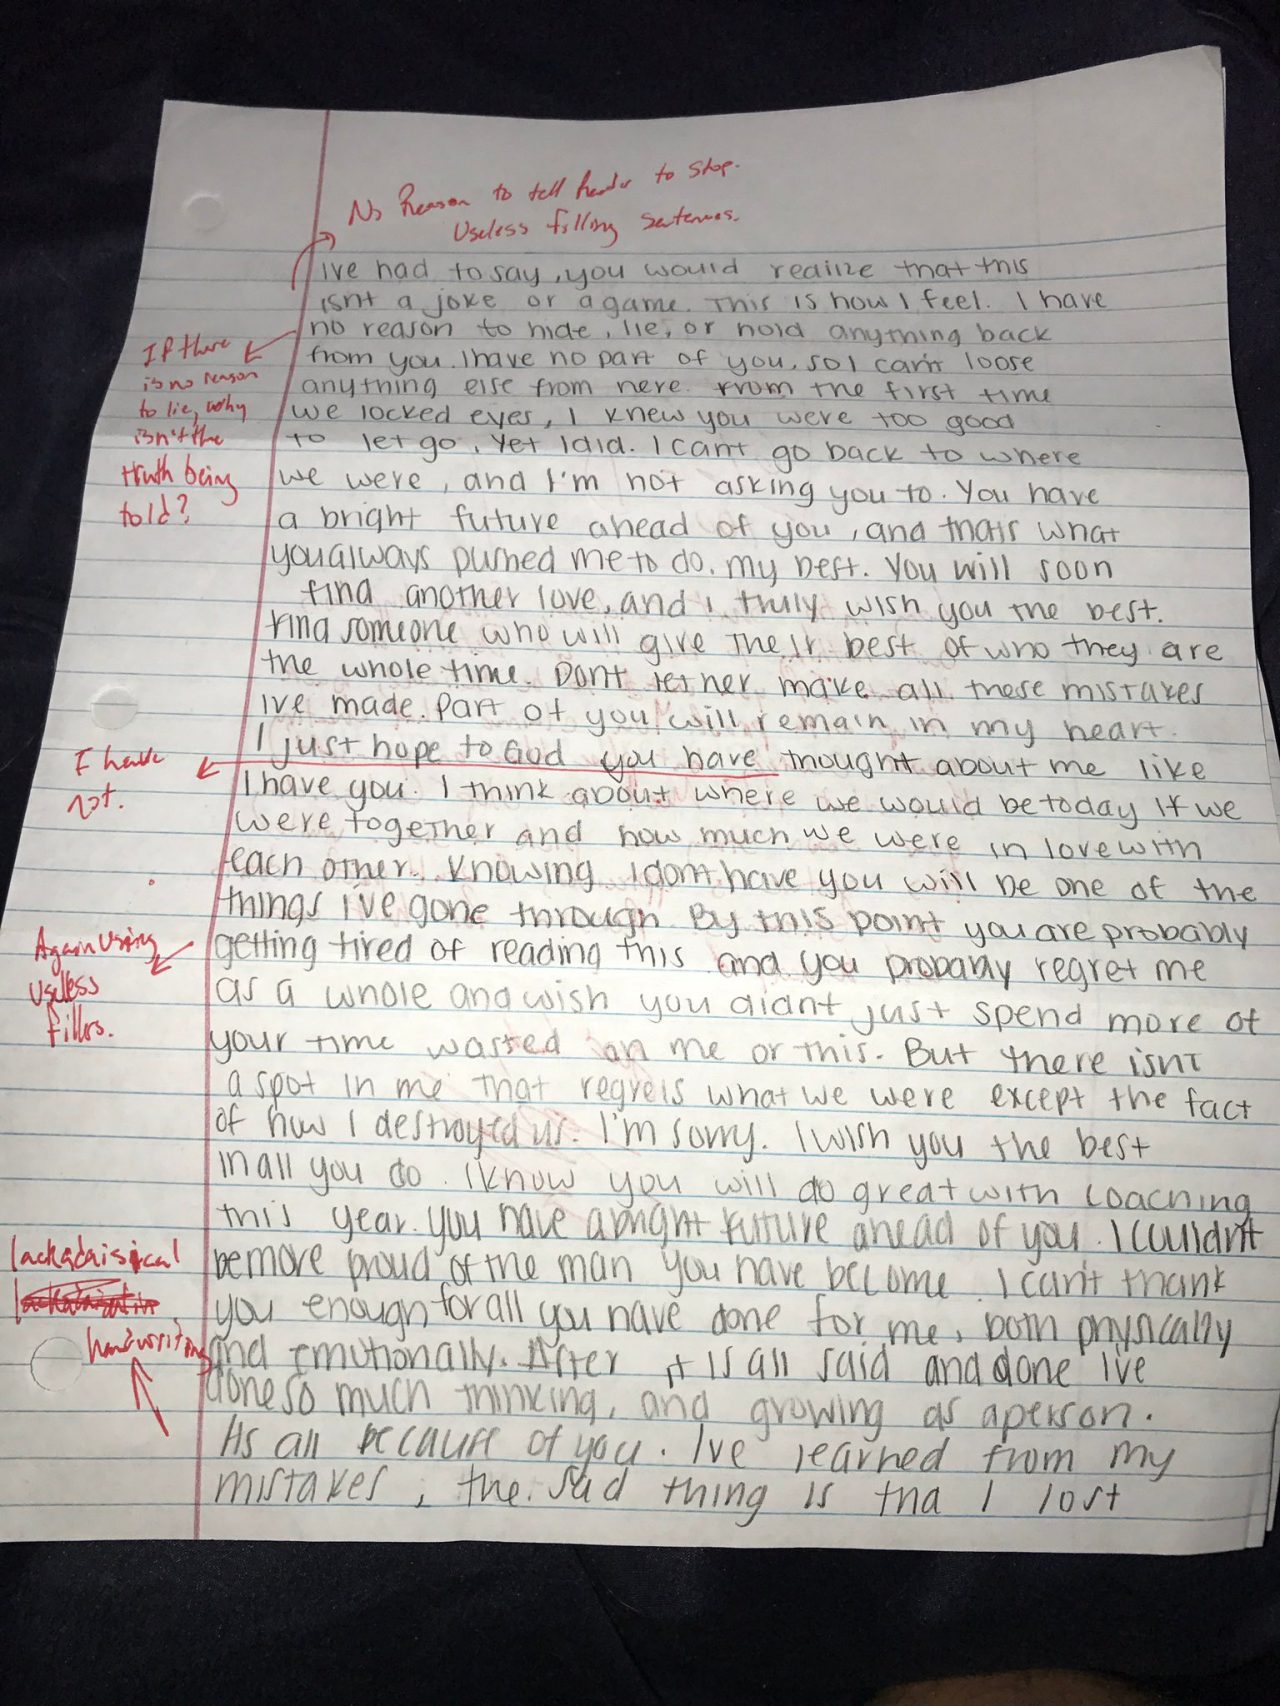 This bloke's ex wrote him an apology letter, and he sent it back graded and critiqued